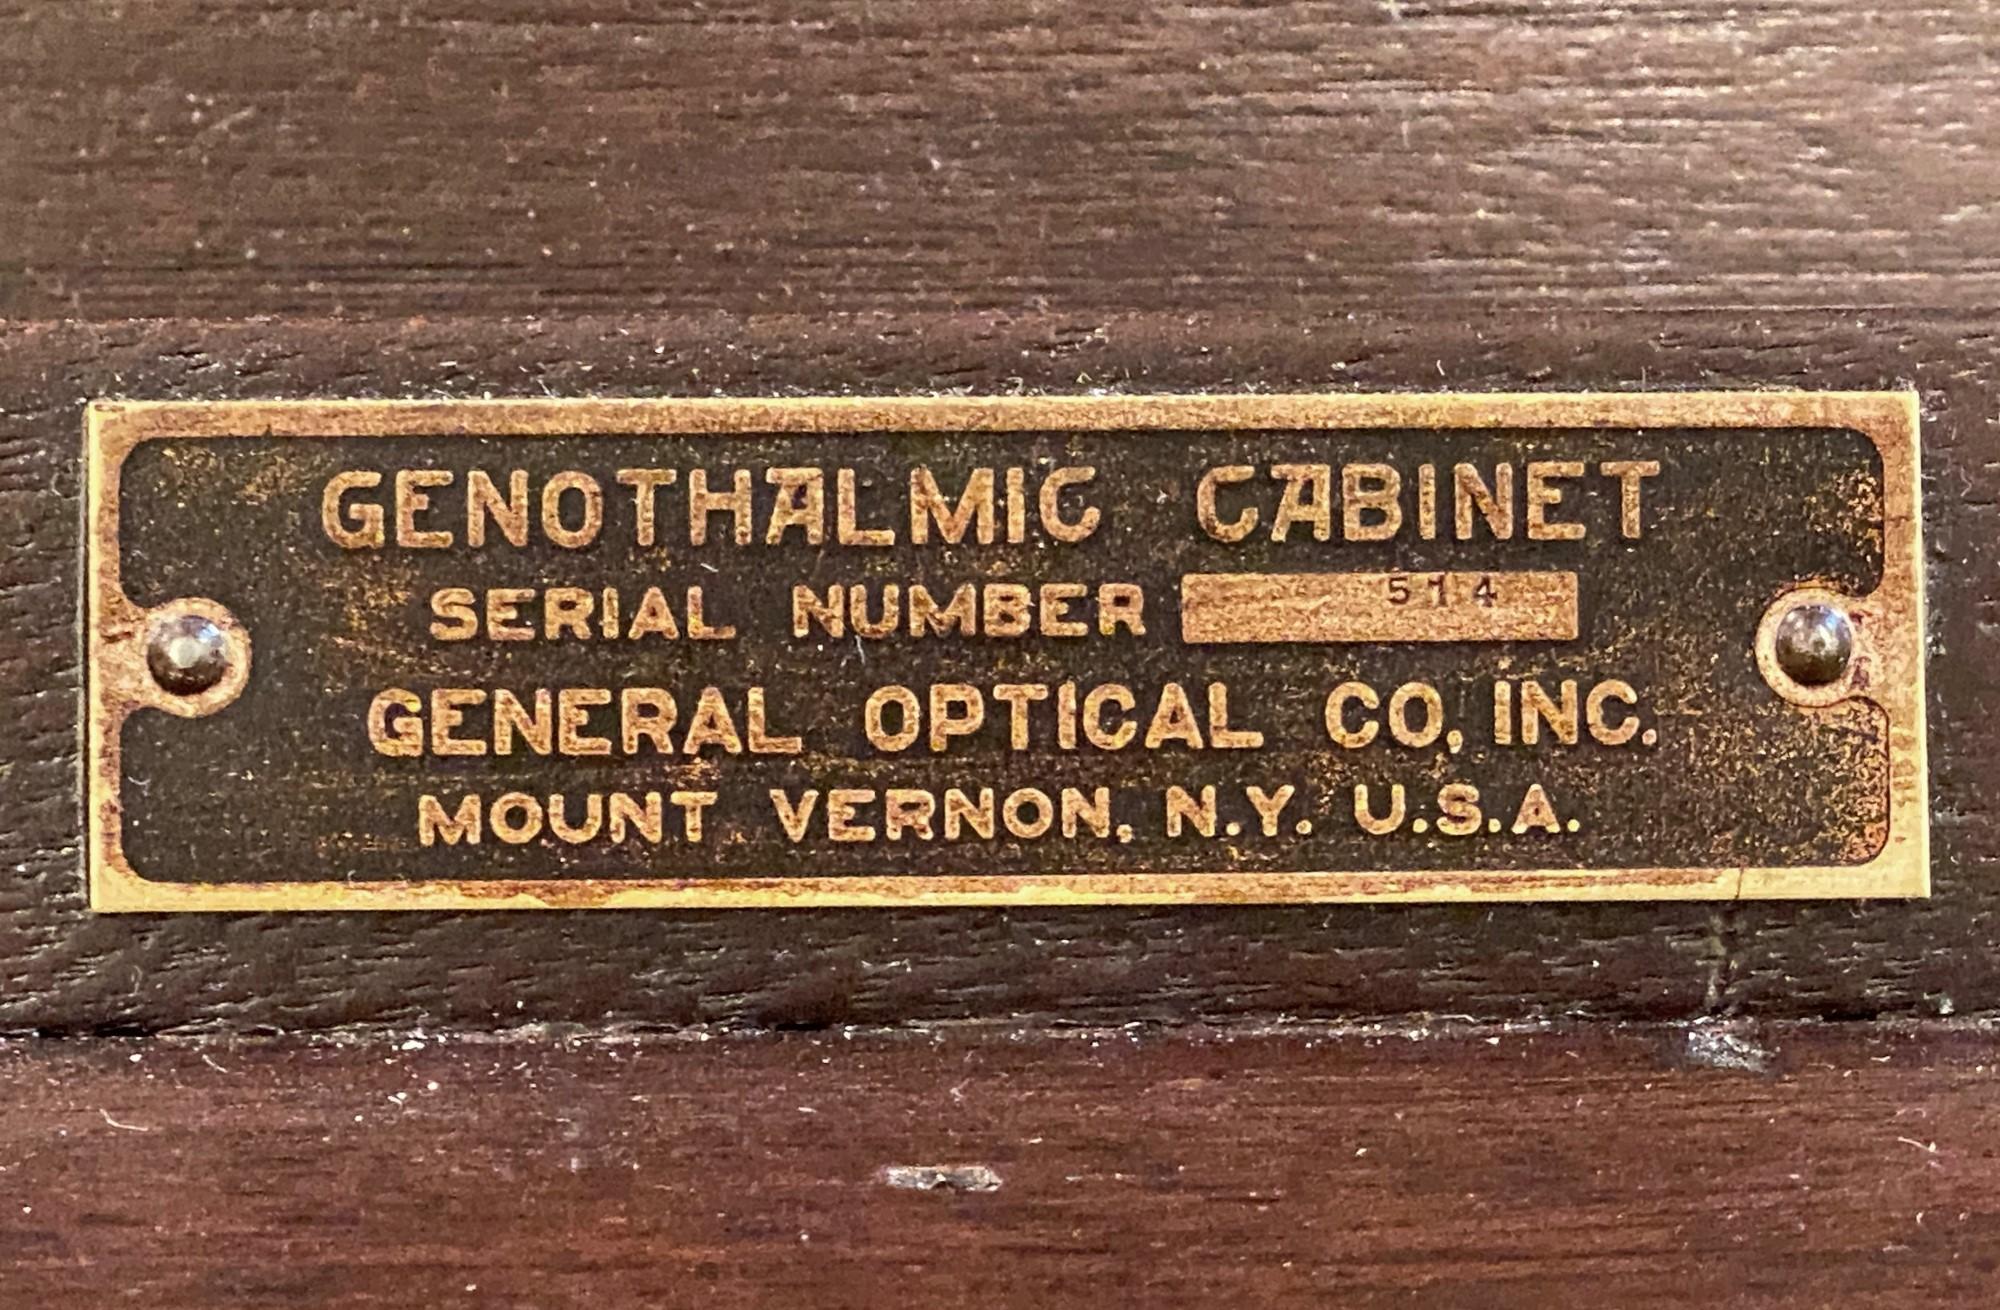 American 1930s Ophthalmic & Genothalmic Medical Cabinet Lots of Drawers and Cubbyholes